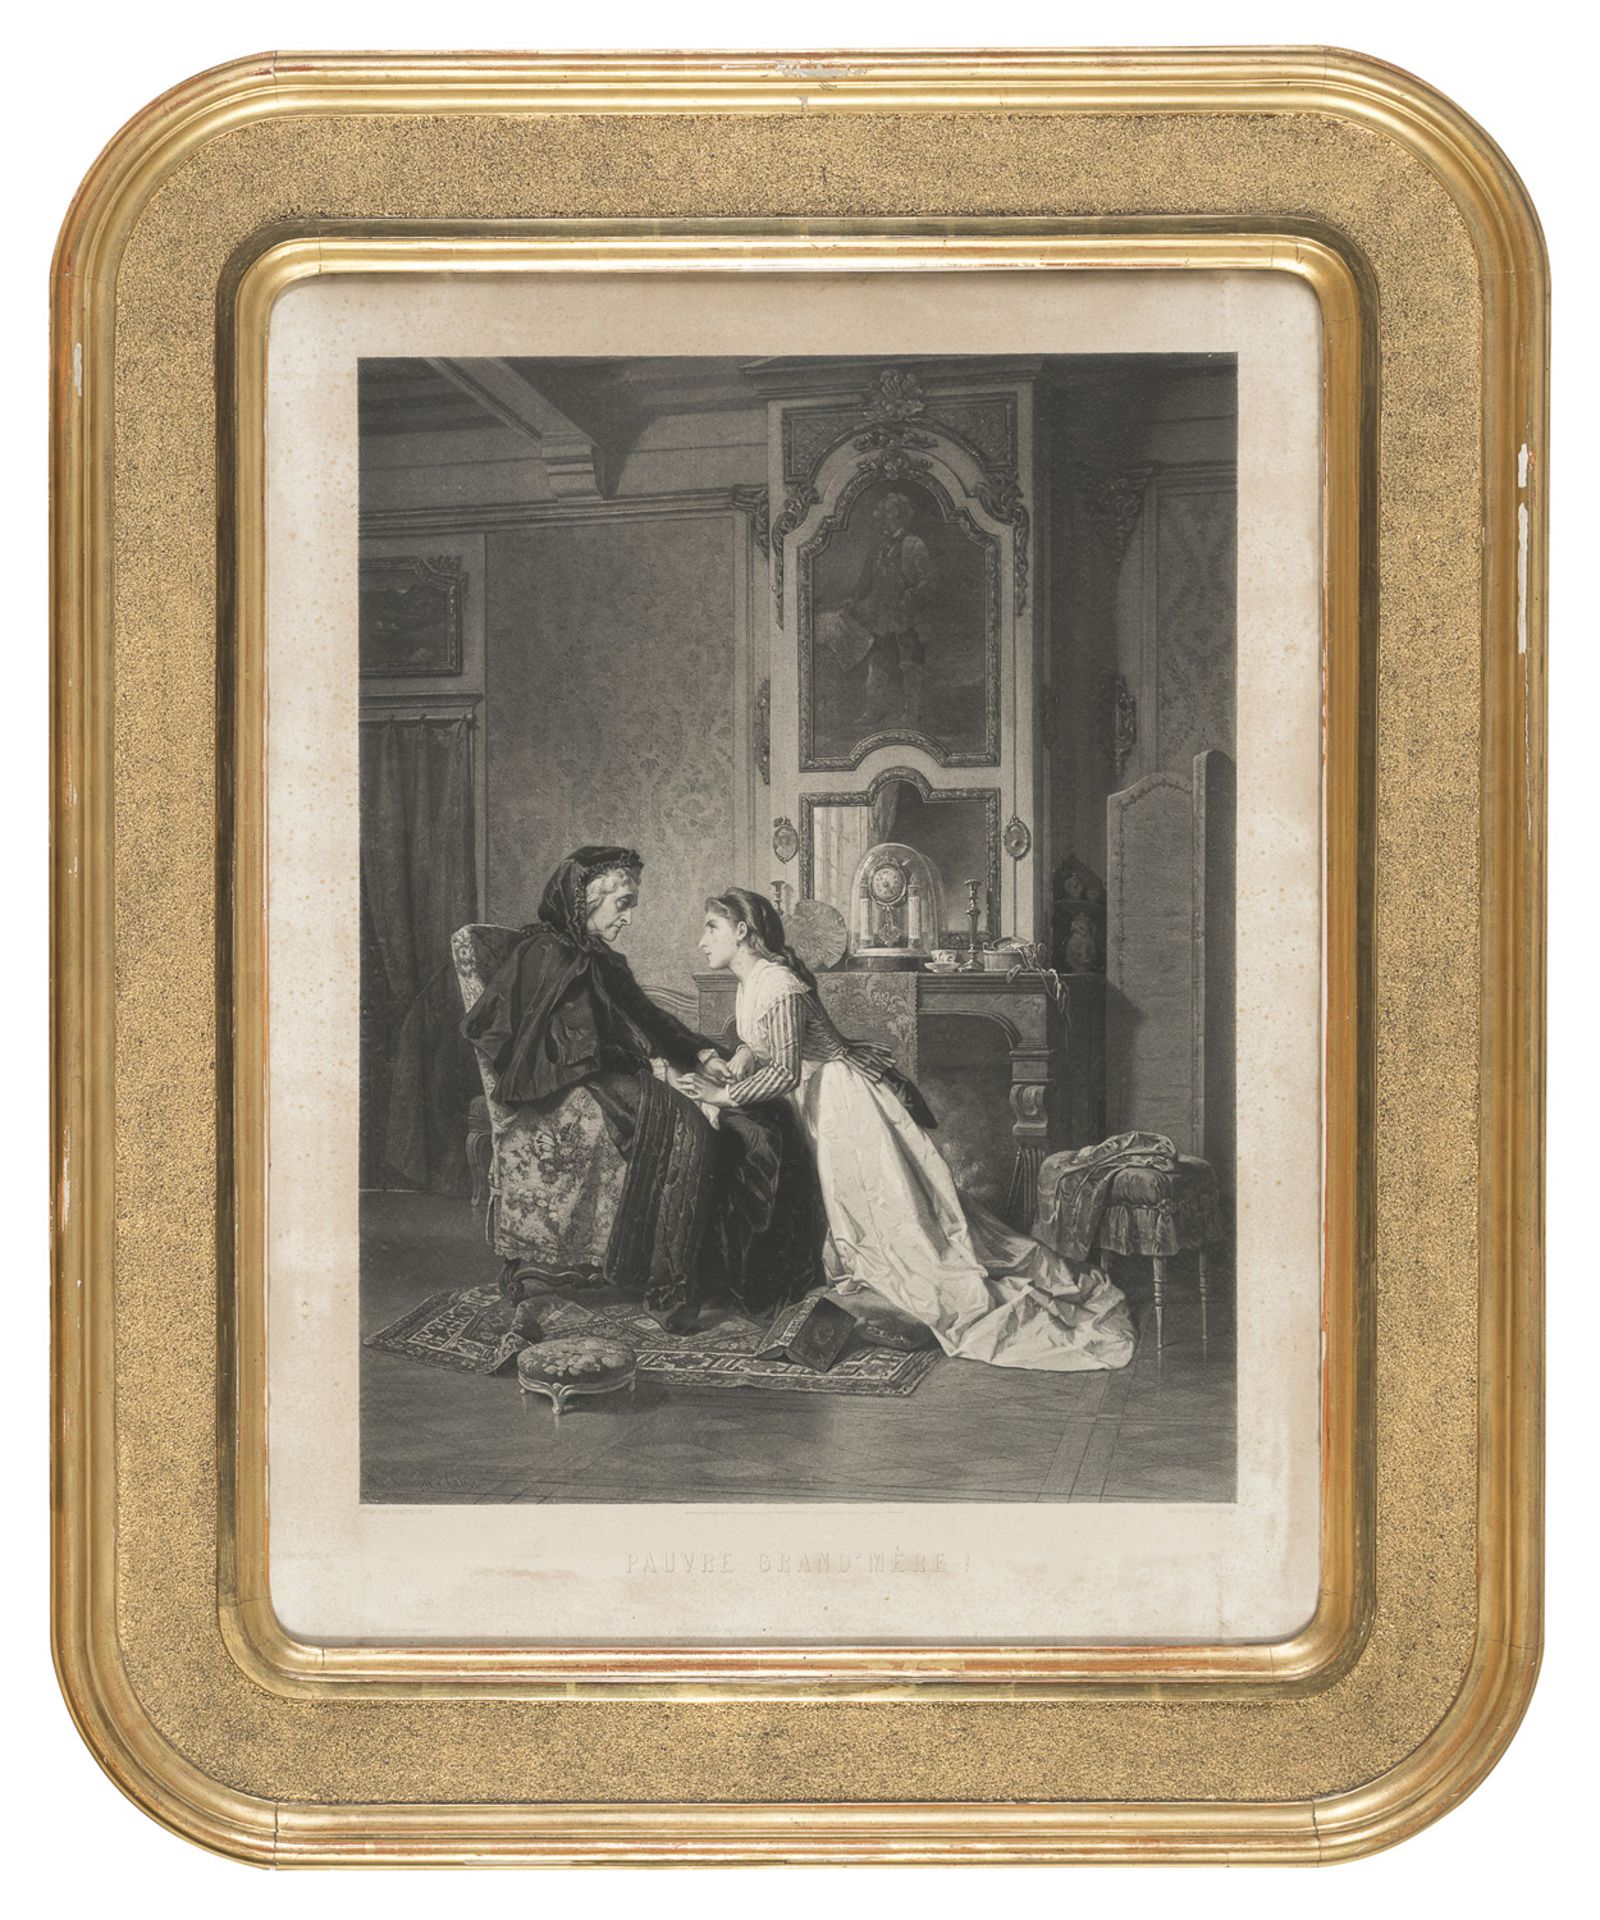 PAIR OF FRENCH ETCHINGS 19TH CENTURY